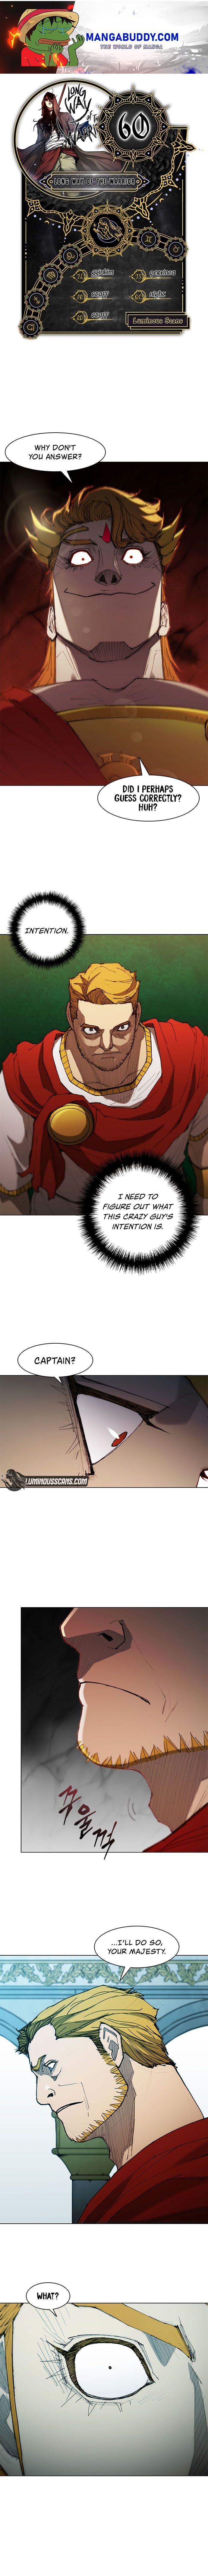 The Long Way Of The Warrior - Page 1